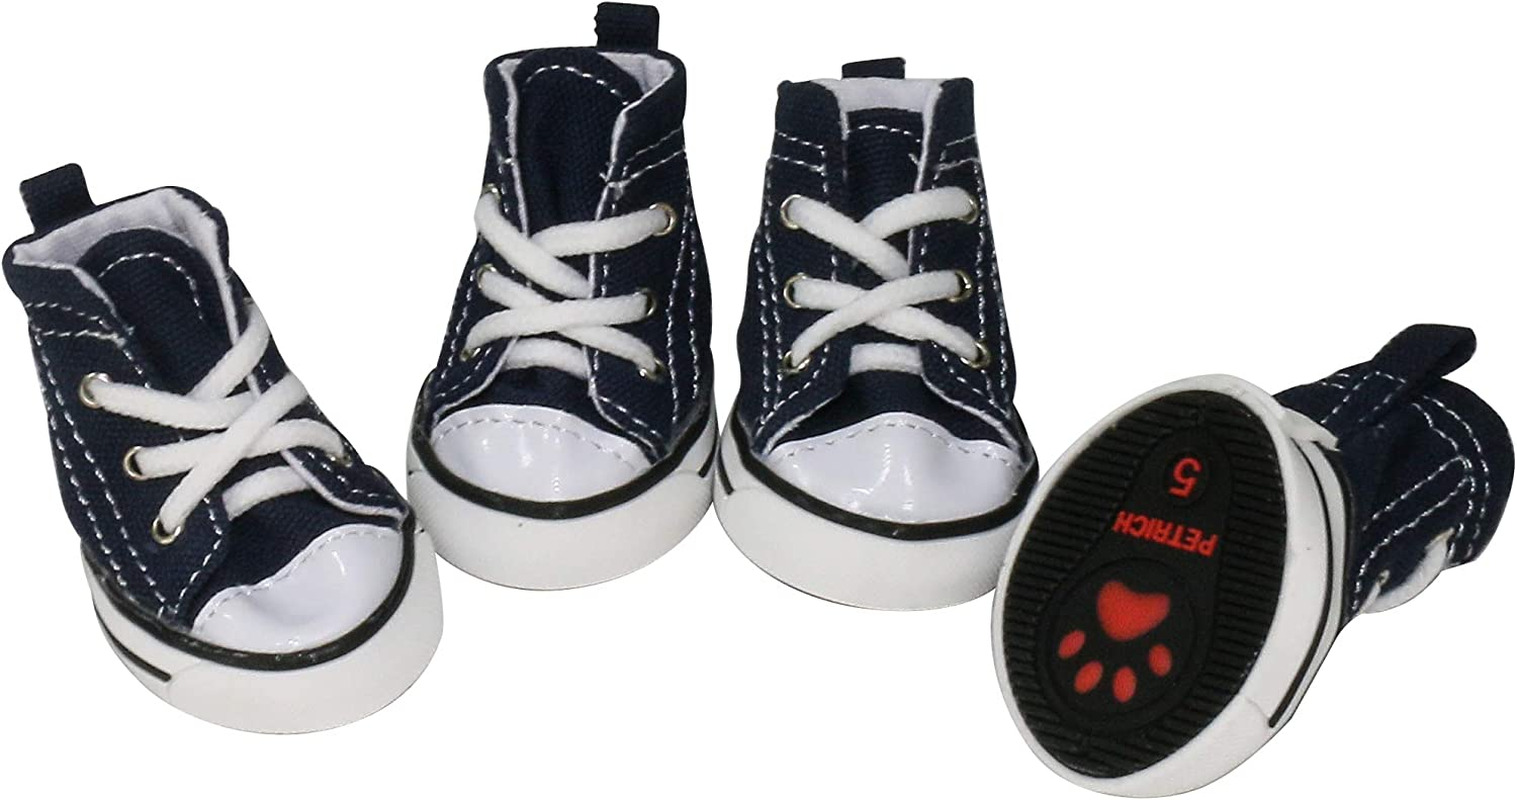 4 Pcs Pet Dog Puppy Canvas Sport Shoes, Sneaker Boots, Outdoor Nonslip Causal Sh